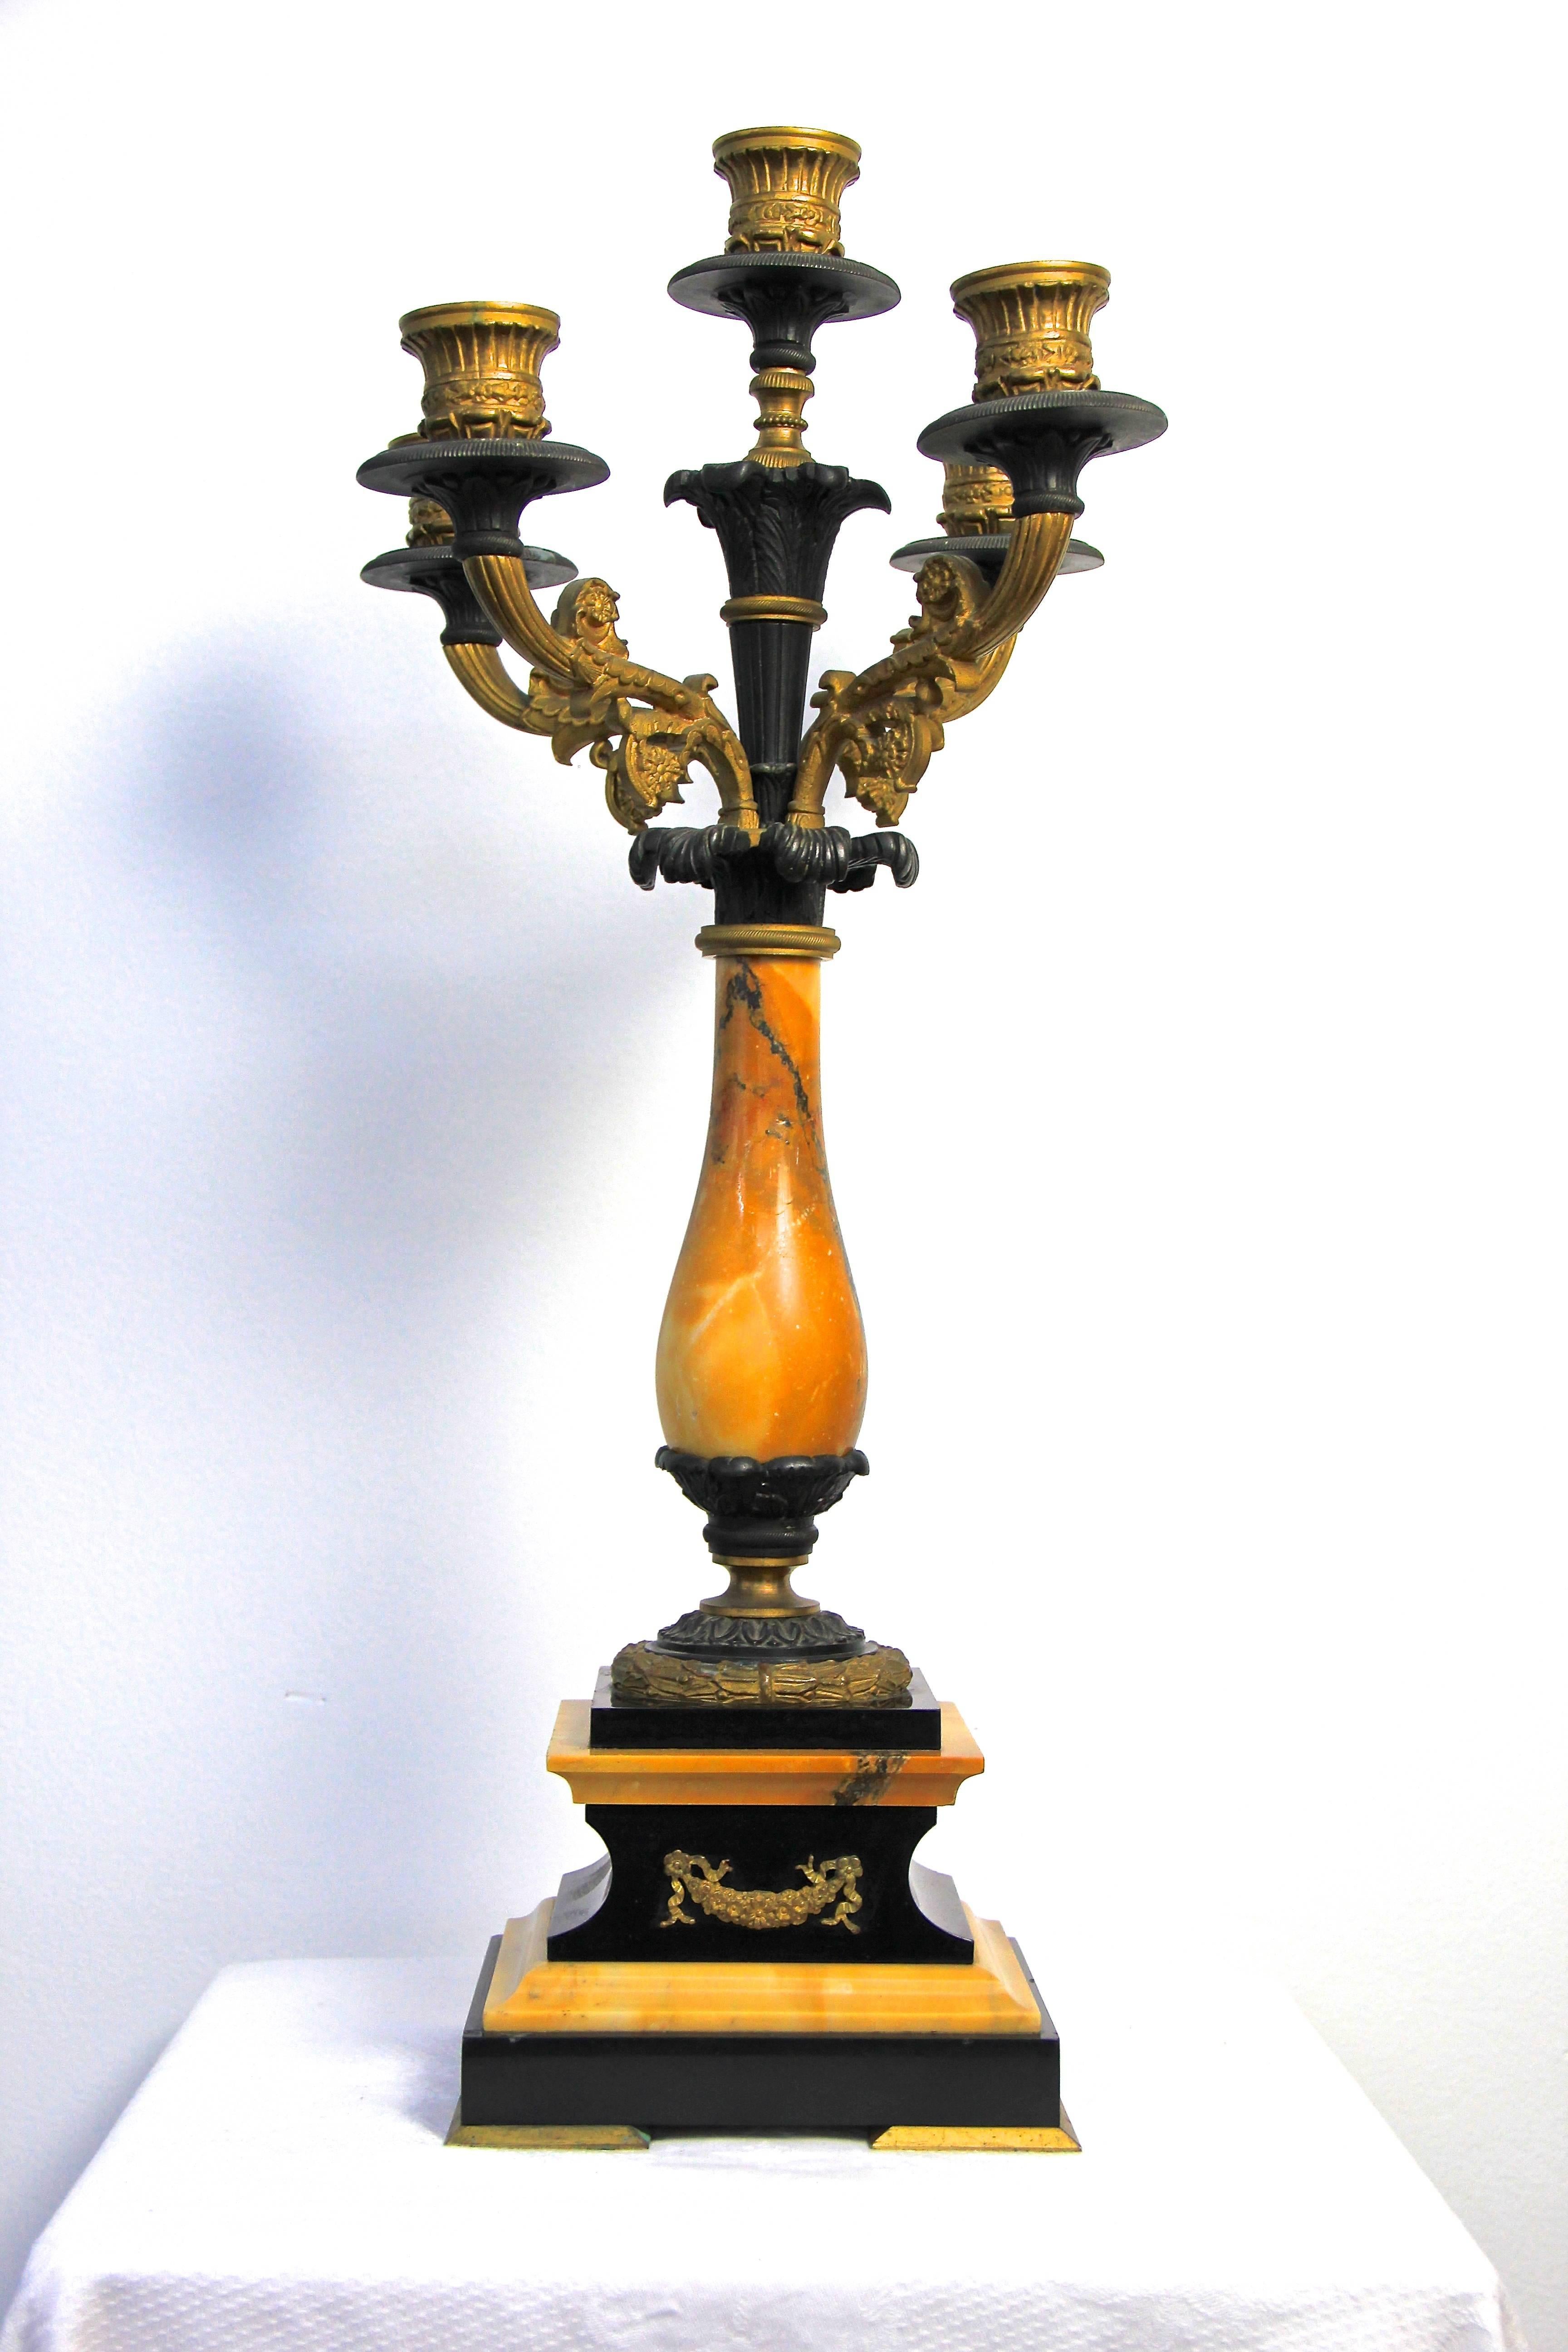 Empire Revival French Candelabra with Black and Yellow Marble Empire Style, France, circa 1850